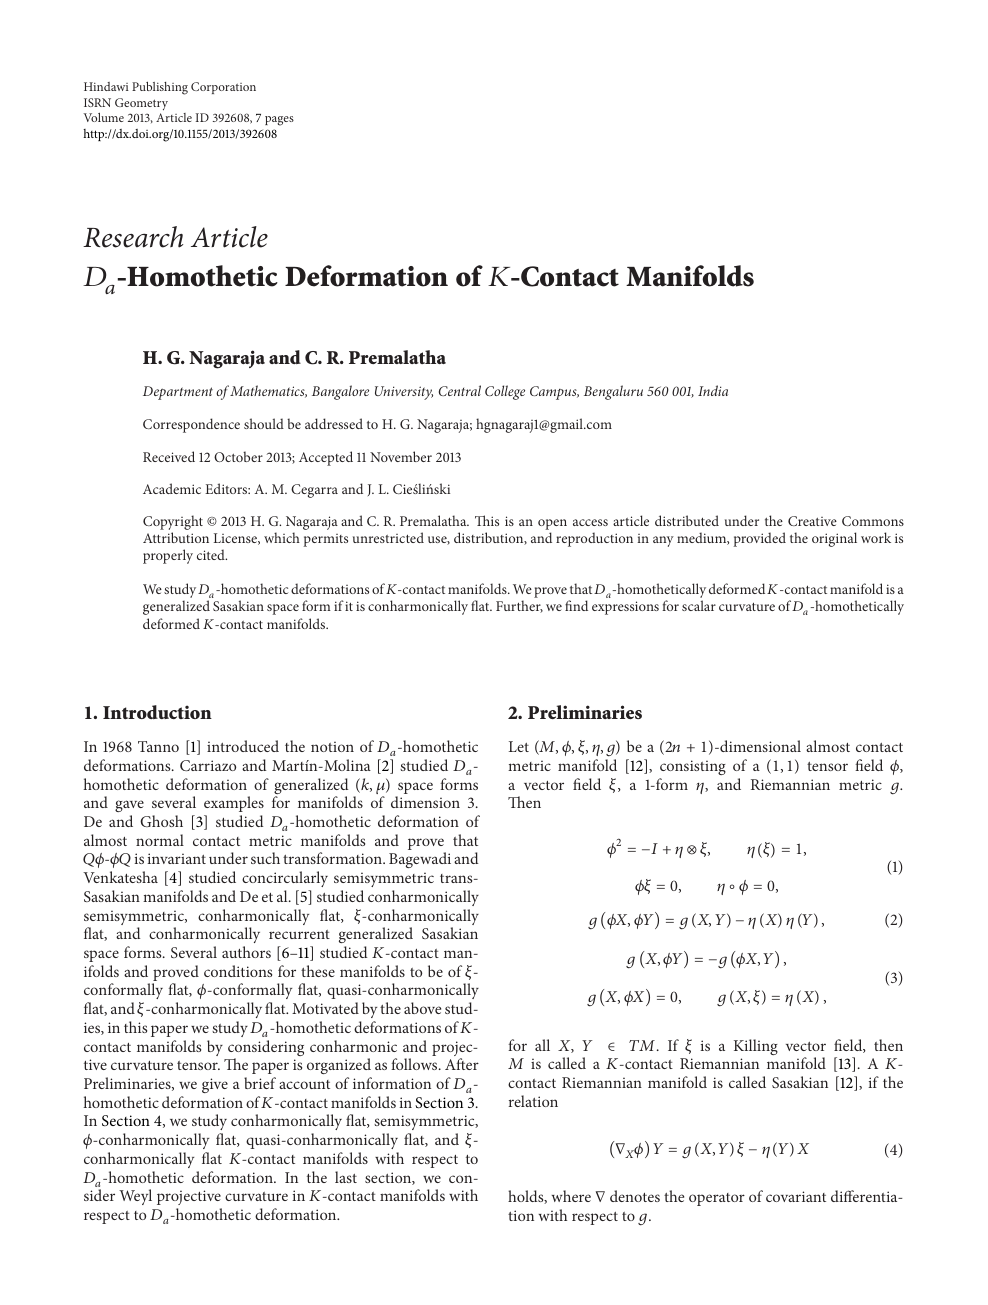 Homothetic Deformation Of Contact Manifolds Topic Of Research Paper In Mathematics Download Scholarly Article Pdf And Read For Free On Cyberleninka Open Science Hub